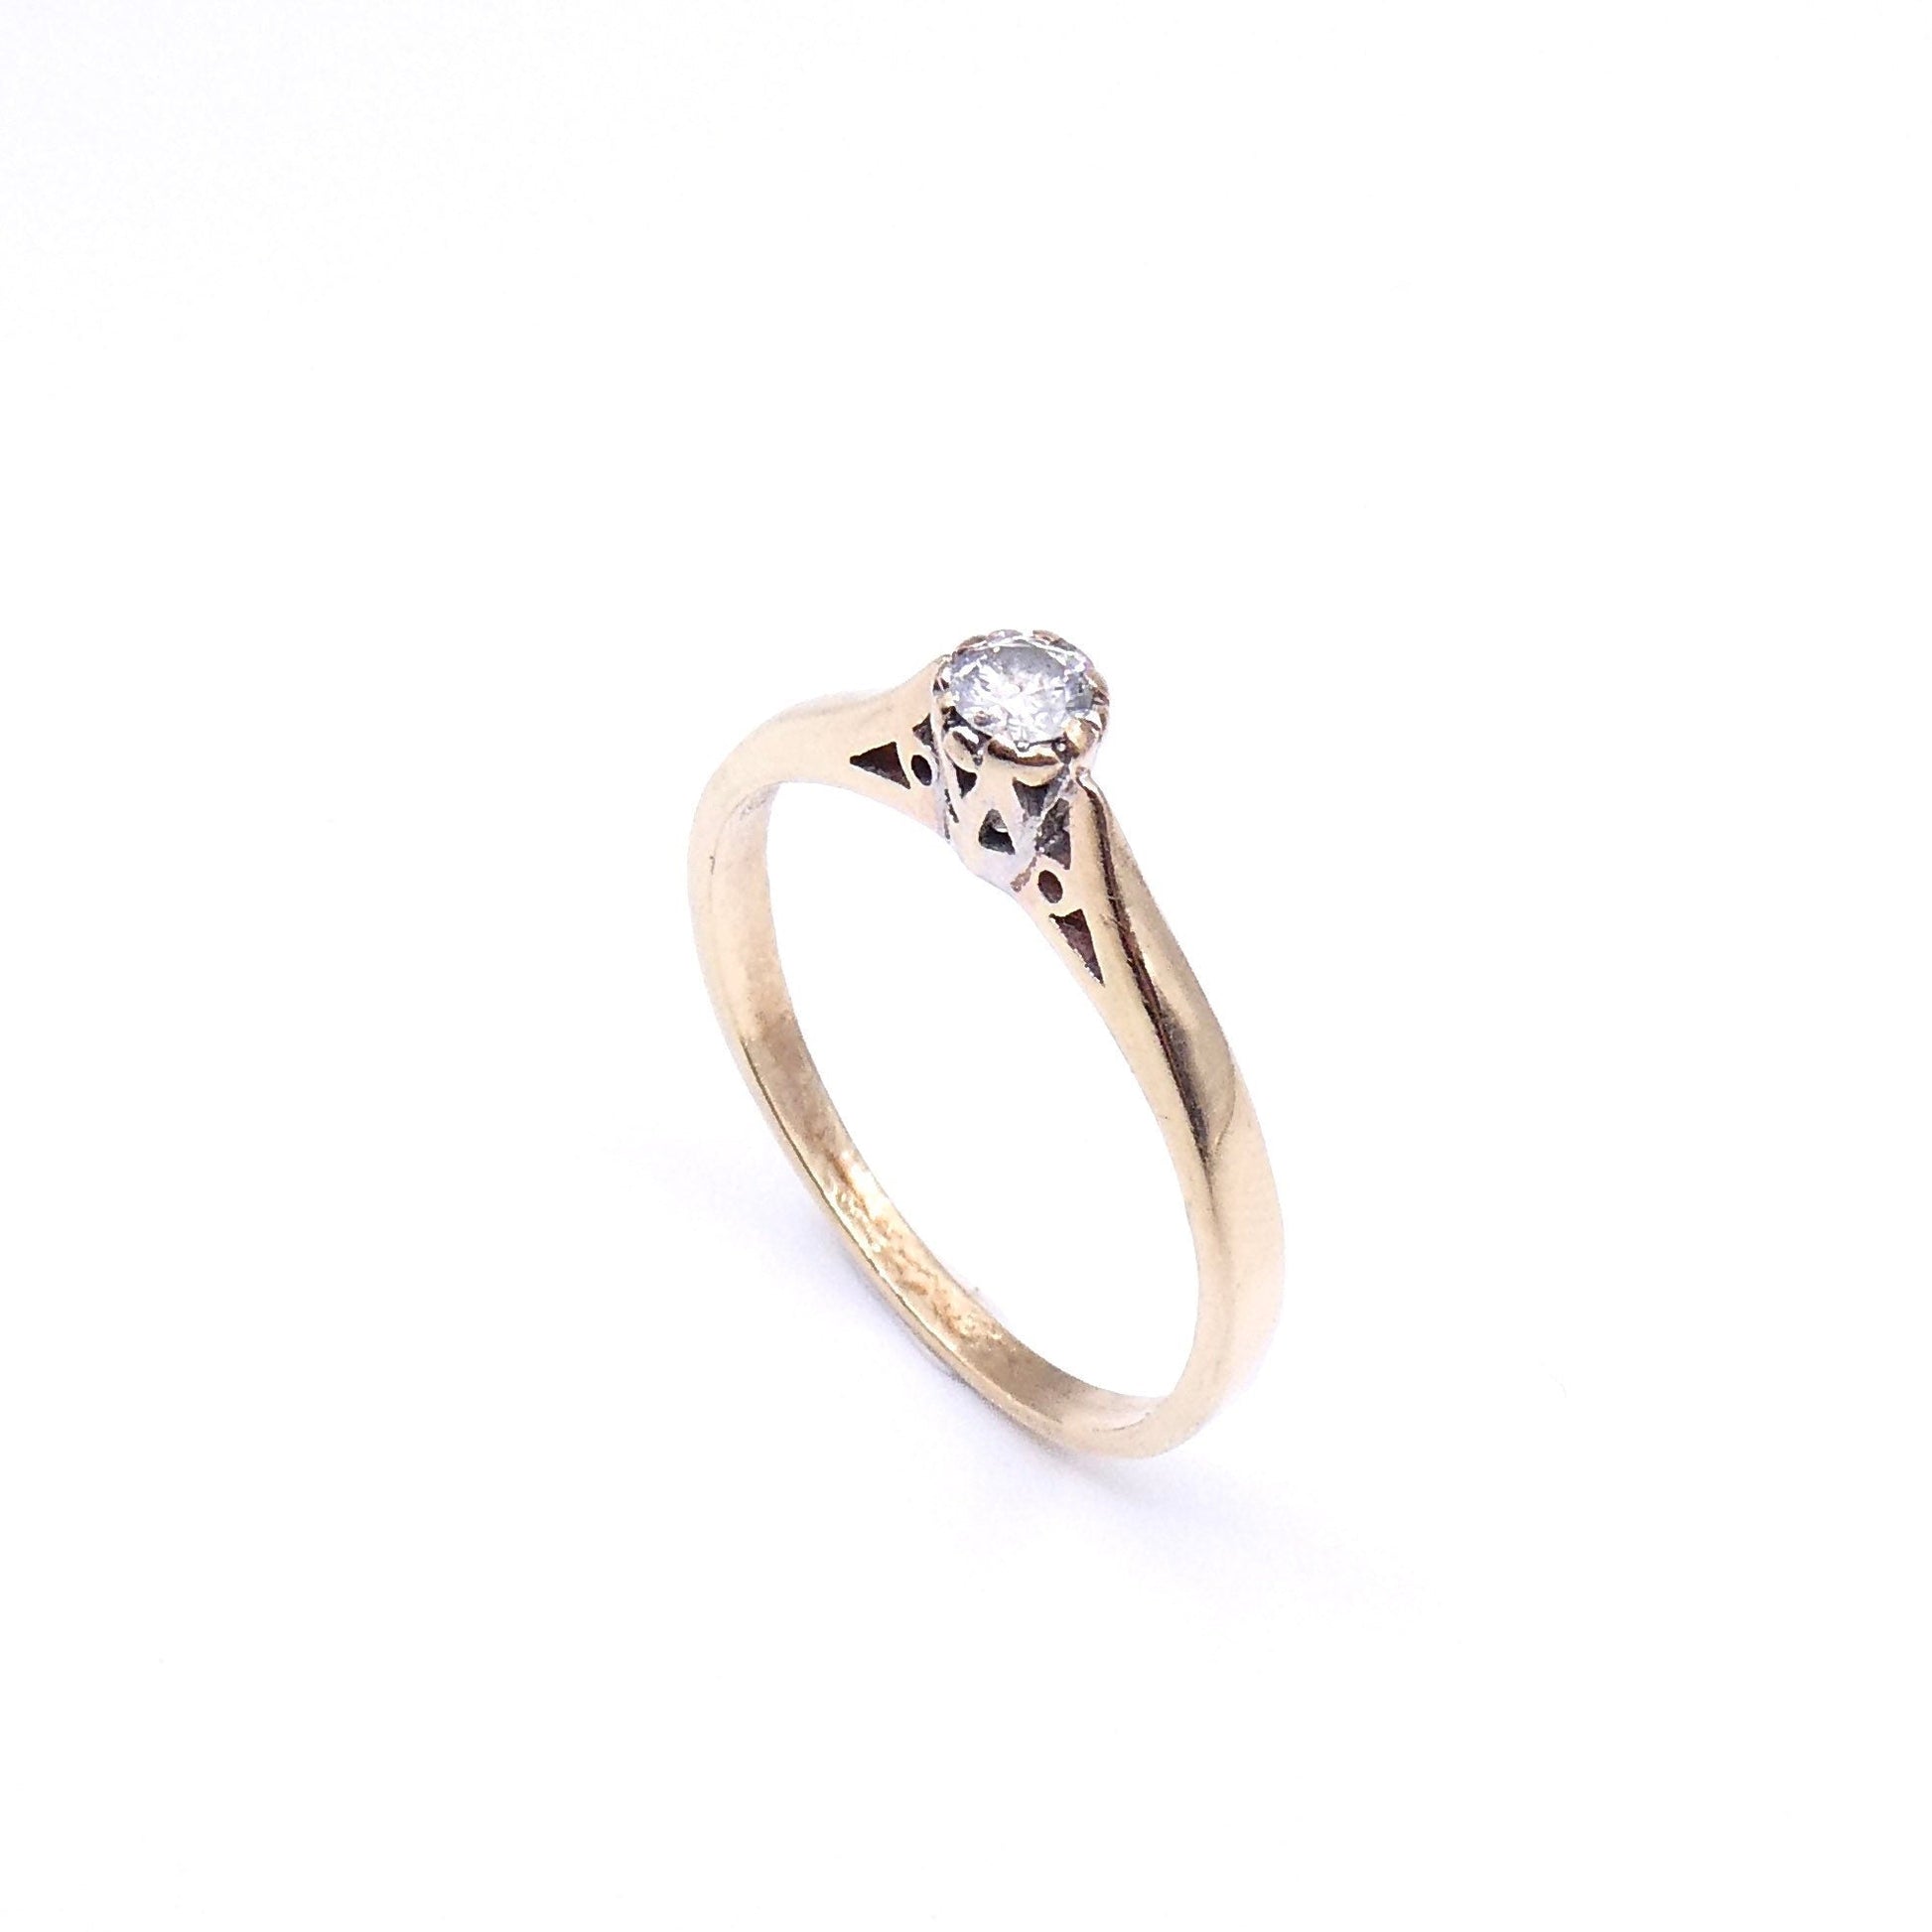 Vintage gray diamond solitaire ring, a small diamond ring set in 9kt gold, a recent vintage diamond ring. - Collected